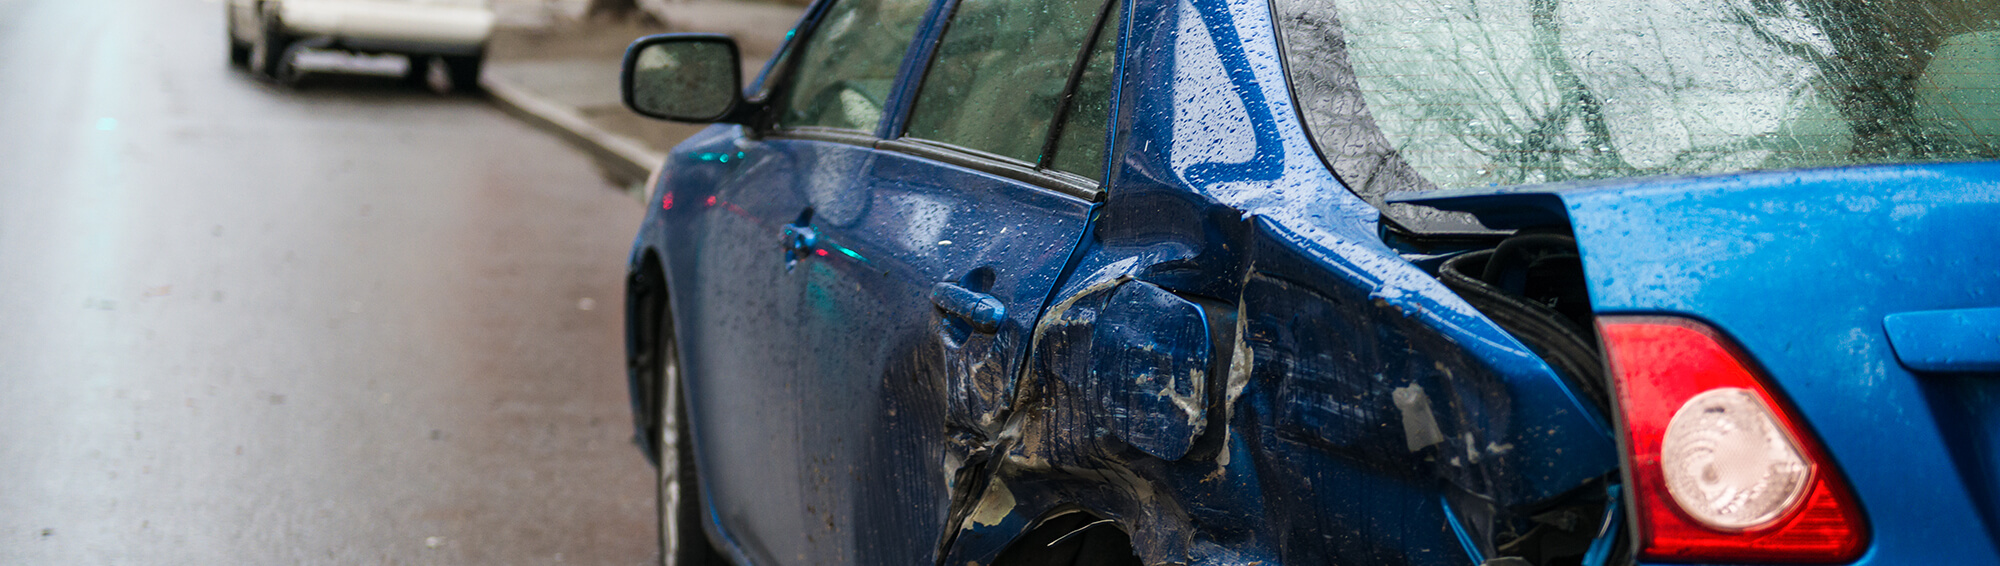 How Social Media Can Hurt Your Auto Accident Claim